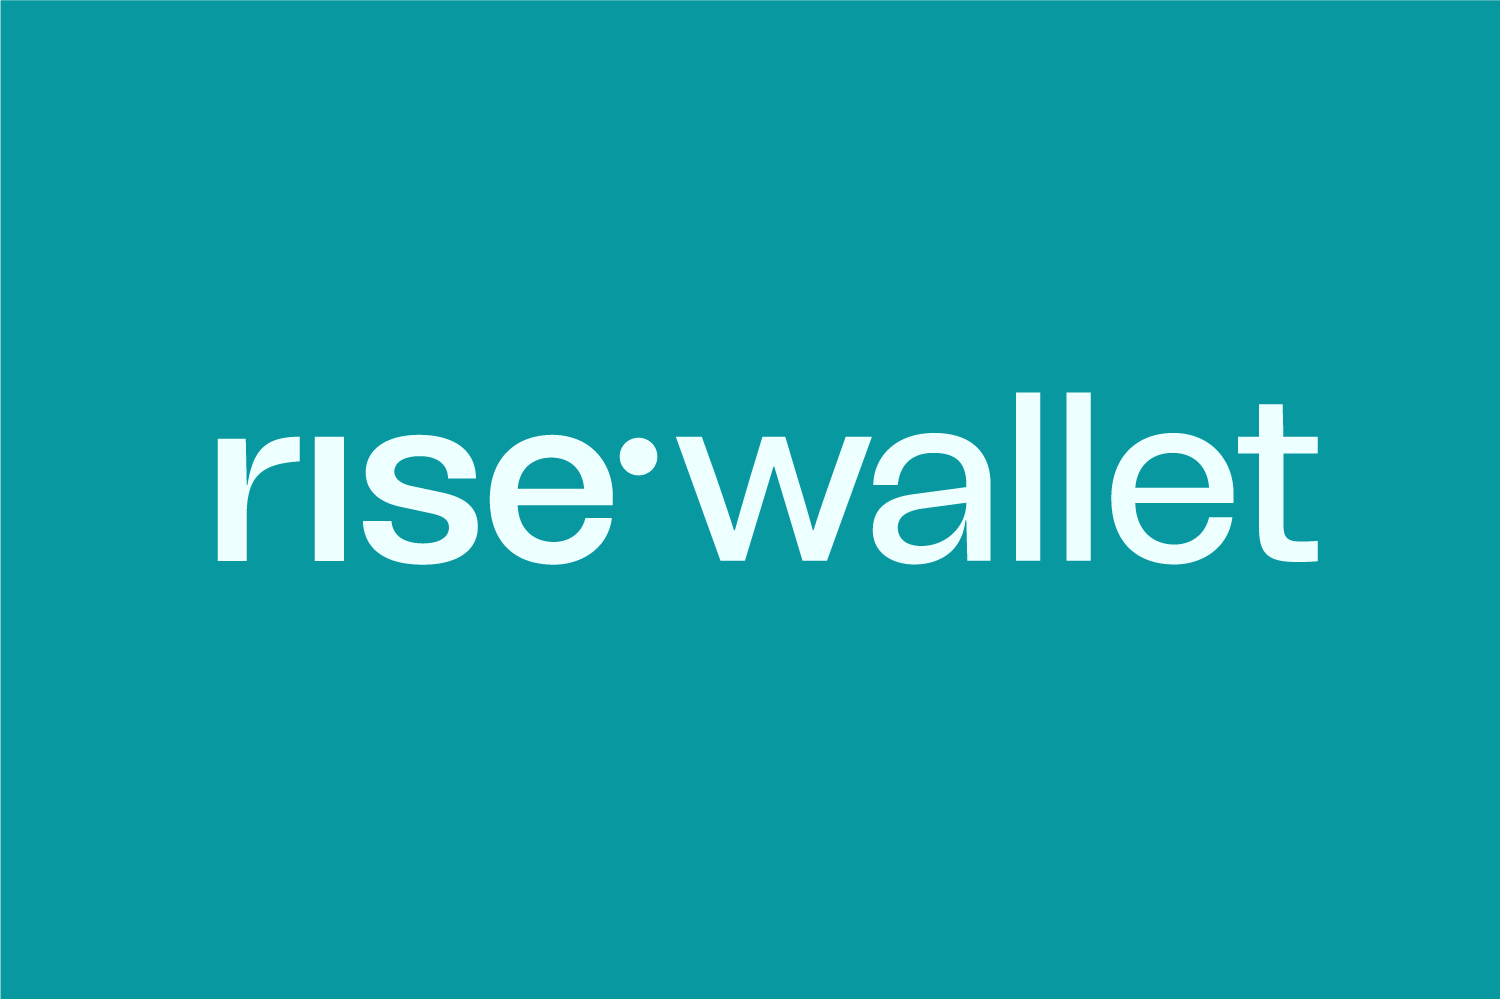 Case-Study-Products-rise-wallet-150522-SB